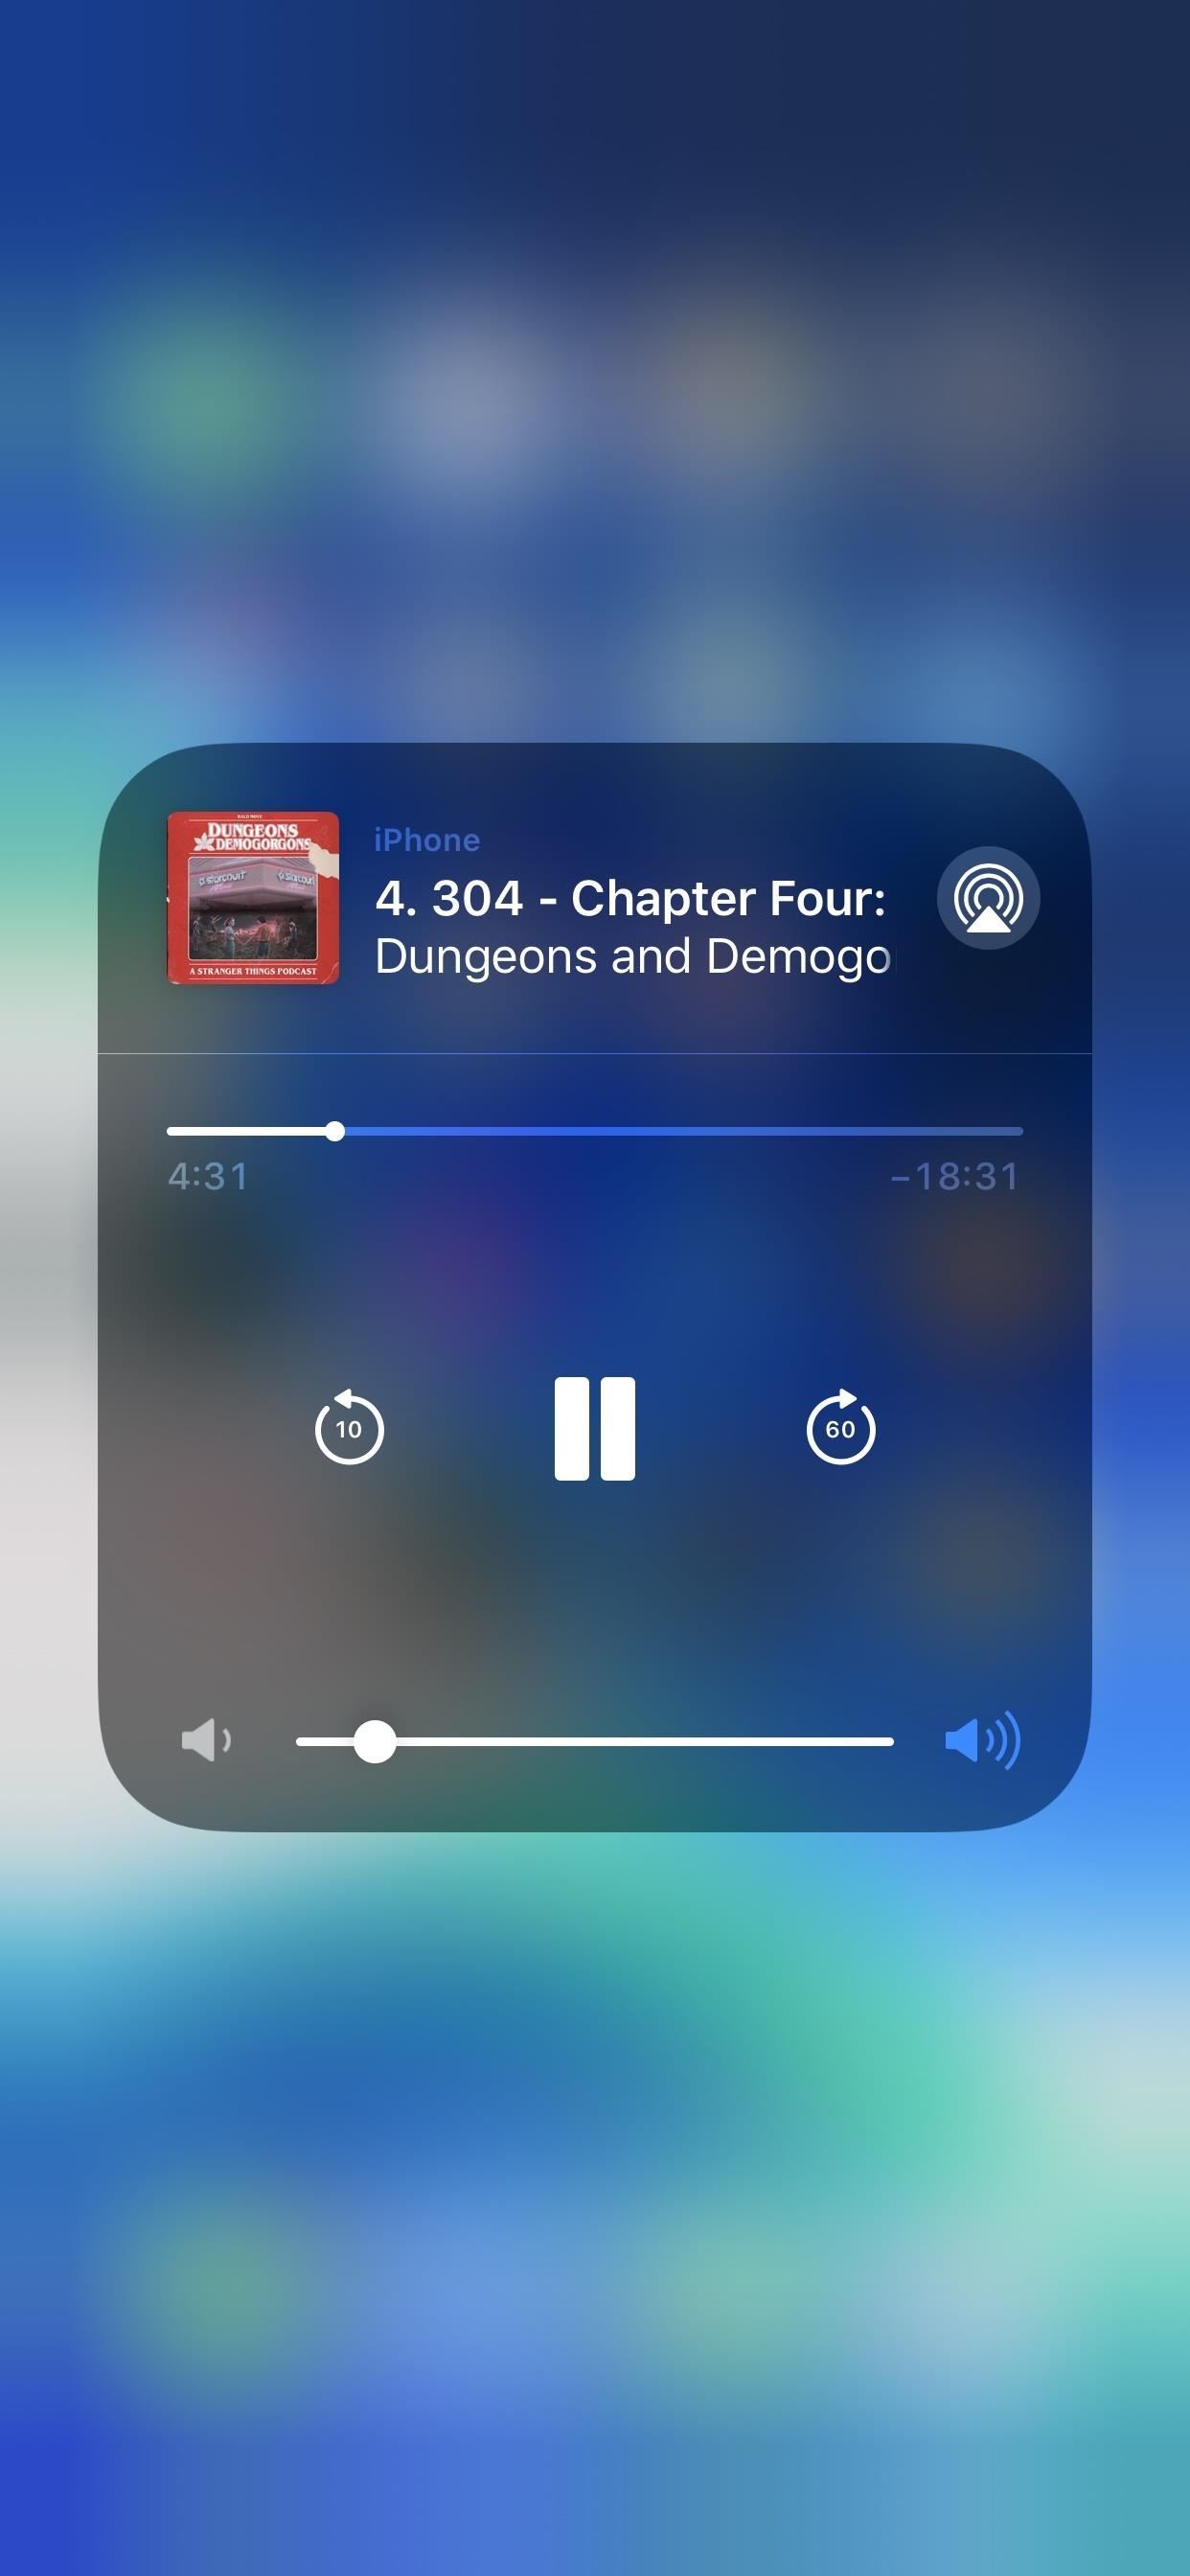 How to Customize the Back & Forward Skip Button Lengths in Apple Podcasts from 10 to 60 Seconds